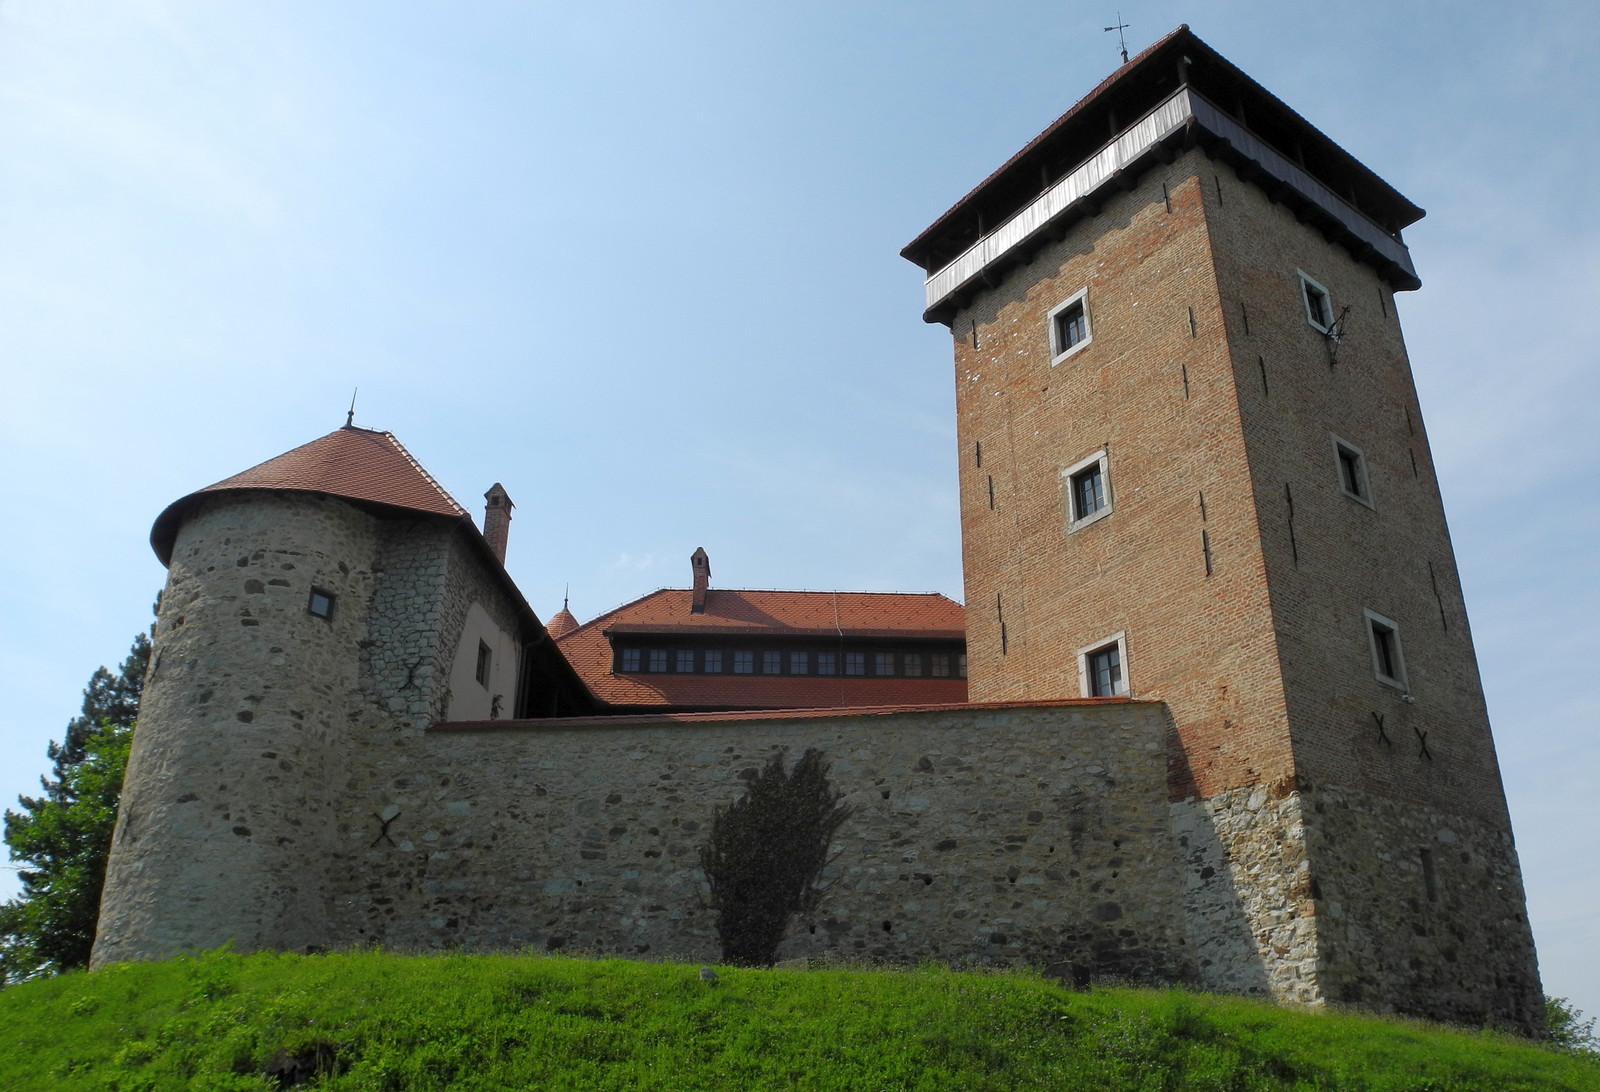 Chapter 11 in which Estonia suddenly gives us residence permits, but we are not sure if we want them anymore, and we go to Dubovac Castle instead